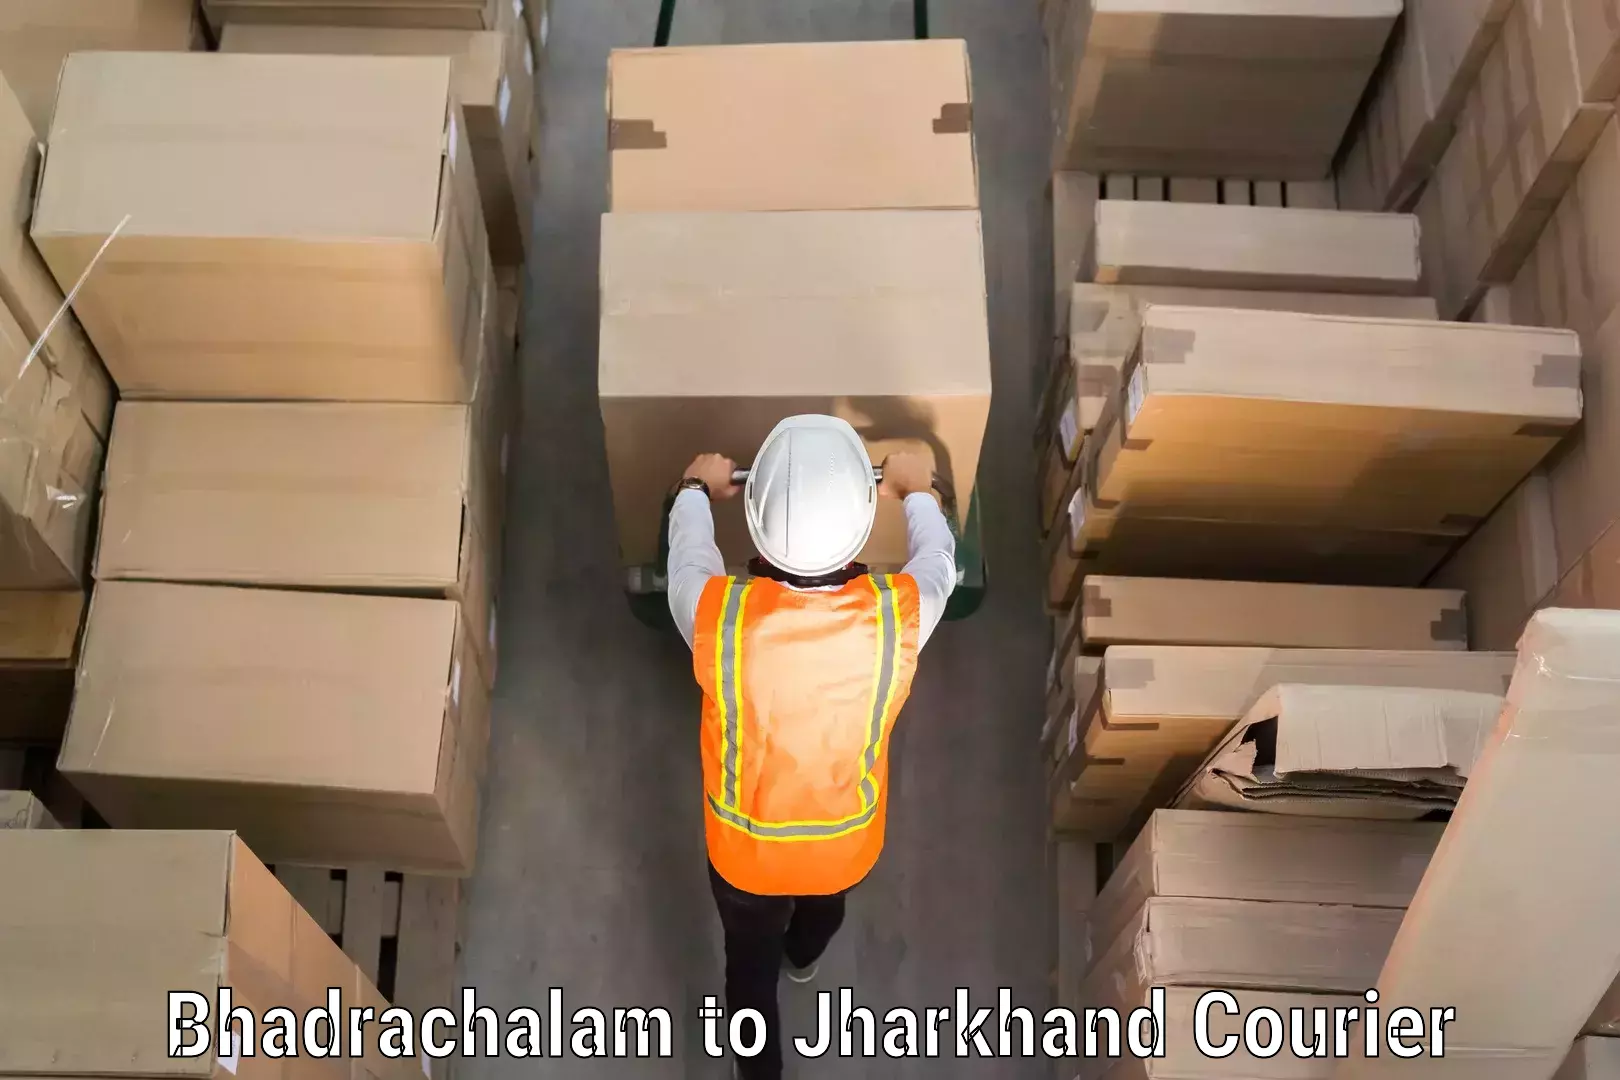 Online luggage shipping booking Bhadrachalam to Jamshedpur